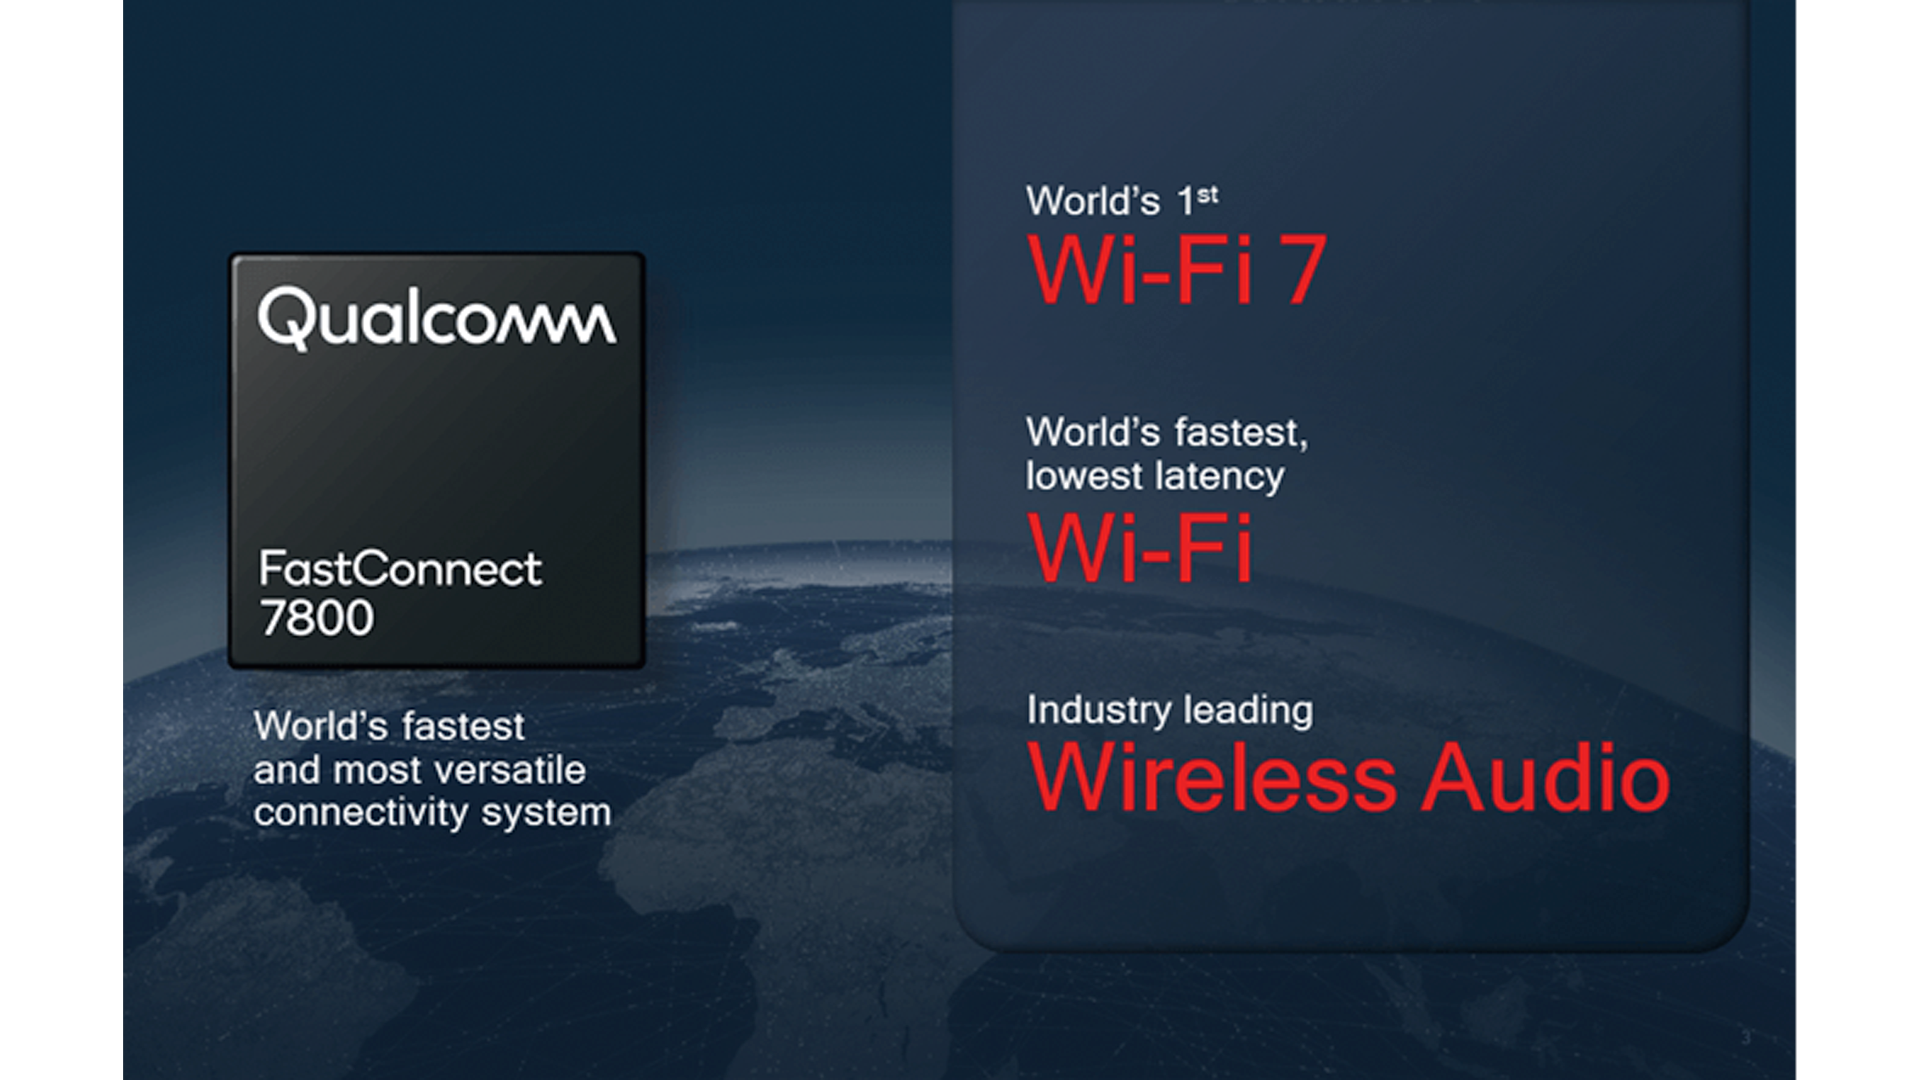 A chart explaining the Qualcomm Fastconnect 7800 platform's capabilities, including Wi-Fi 7 and low-latency Bluetooth.